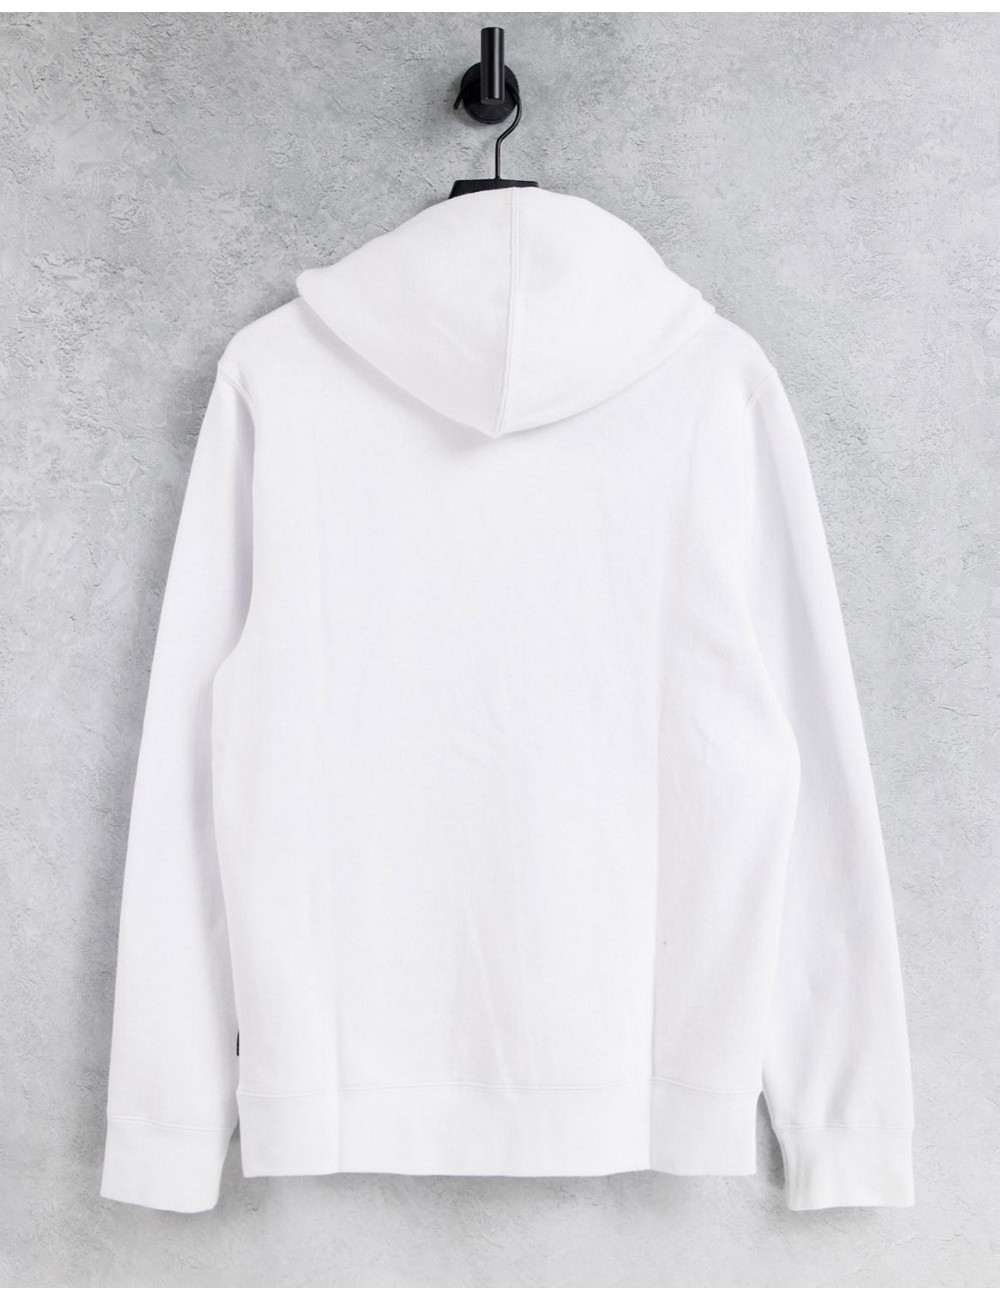 HUF type hoodie in white